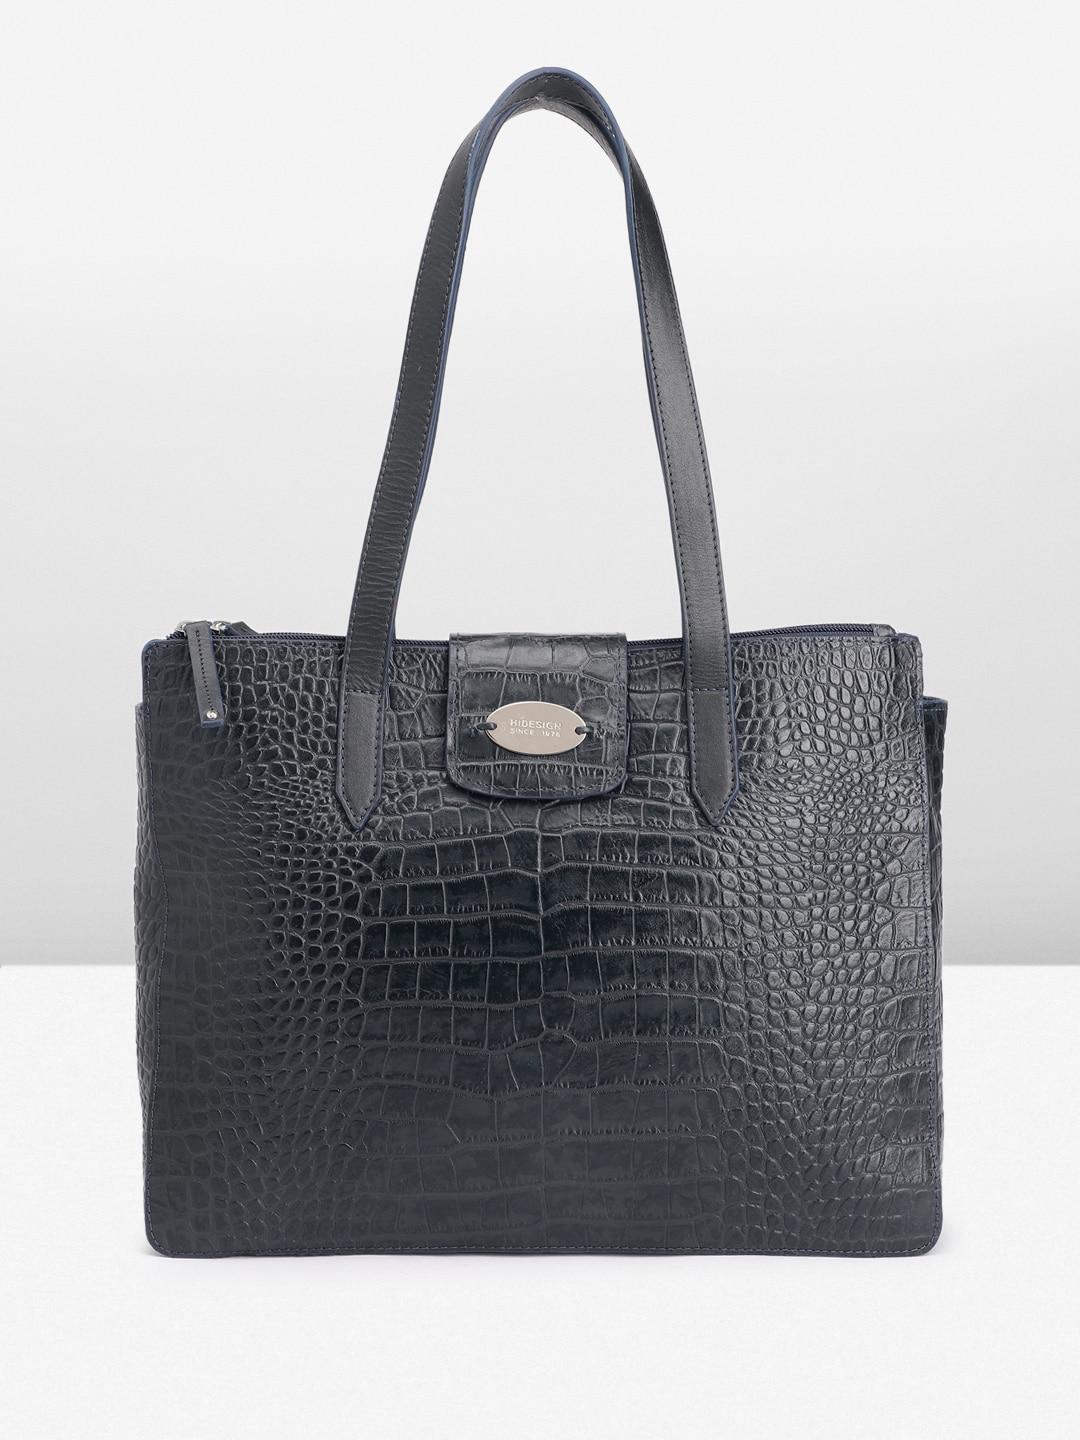 hidesign-animal-textured-leather-structured-shoulder-bag-with-laptop-sleeve